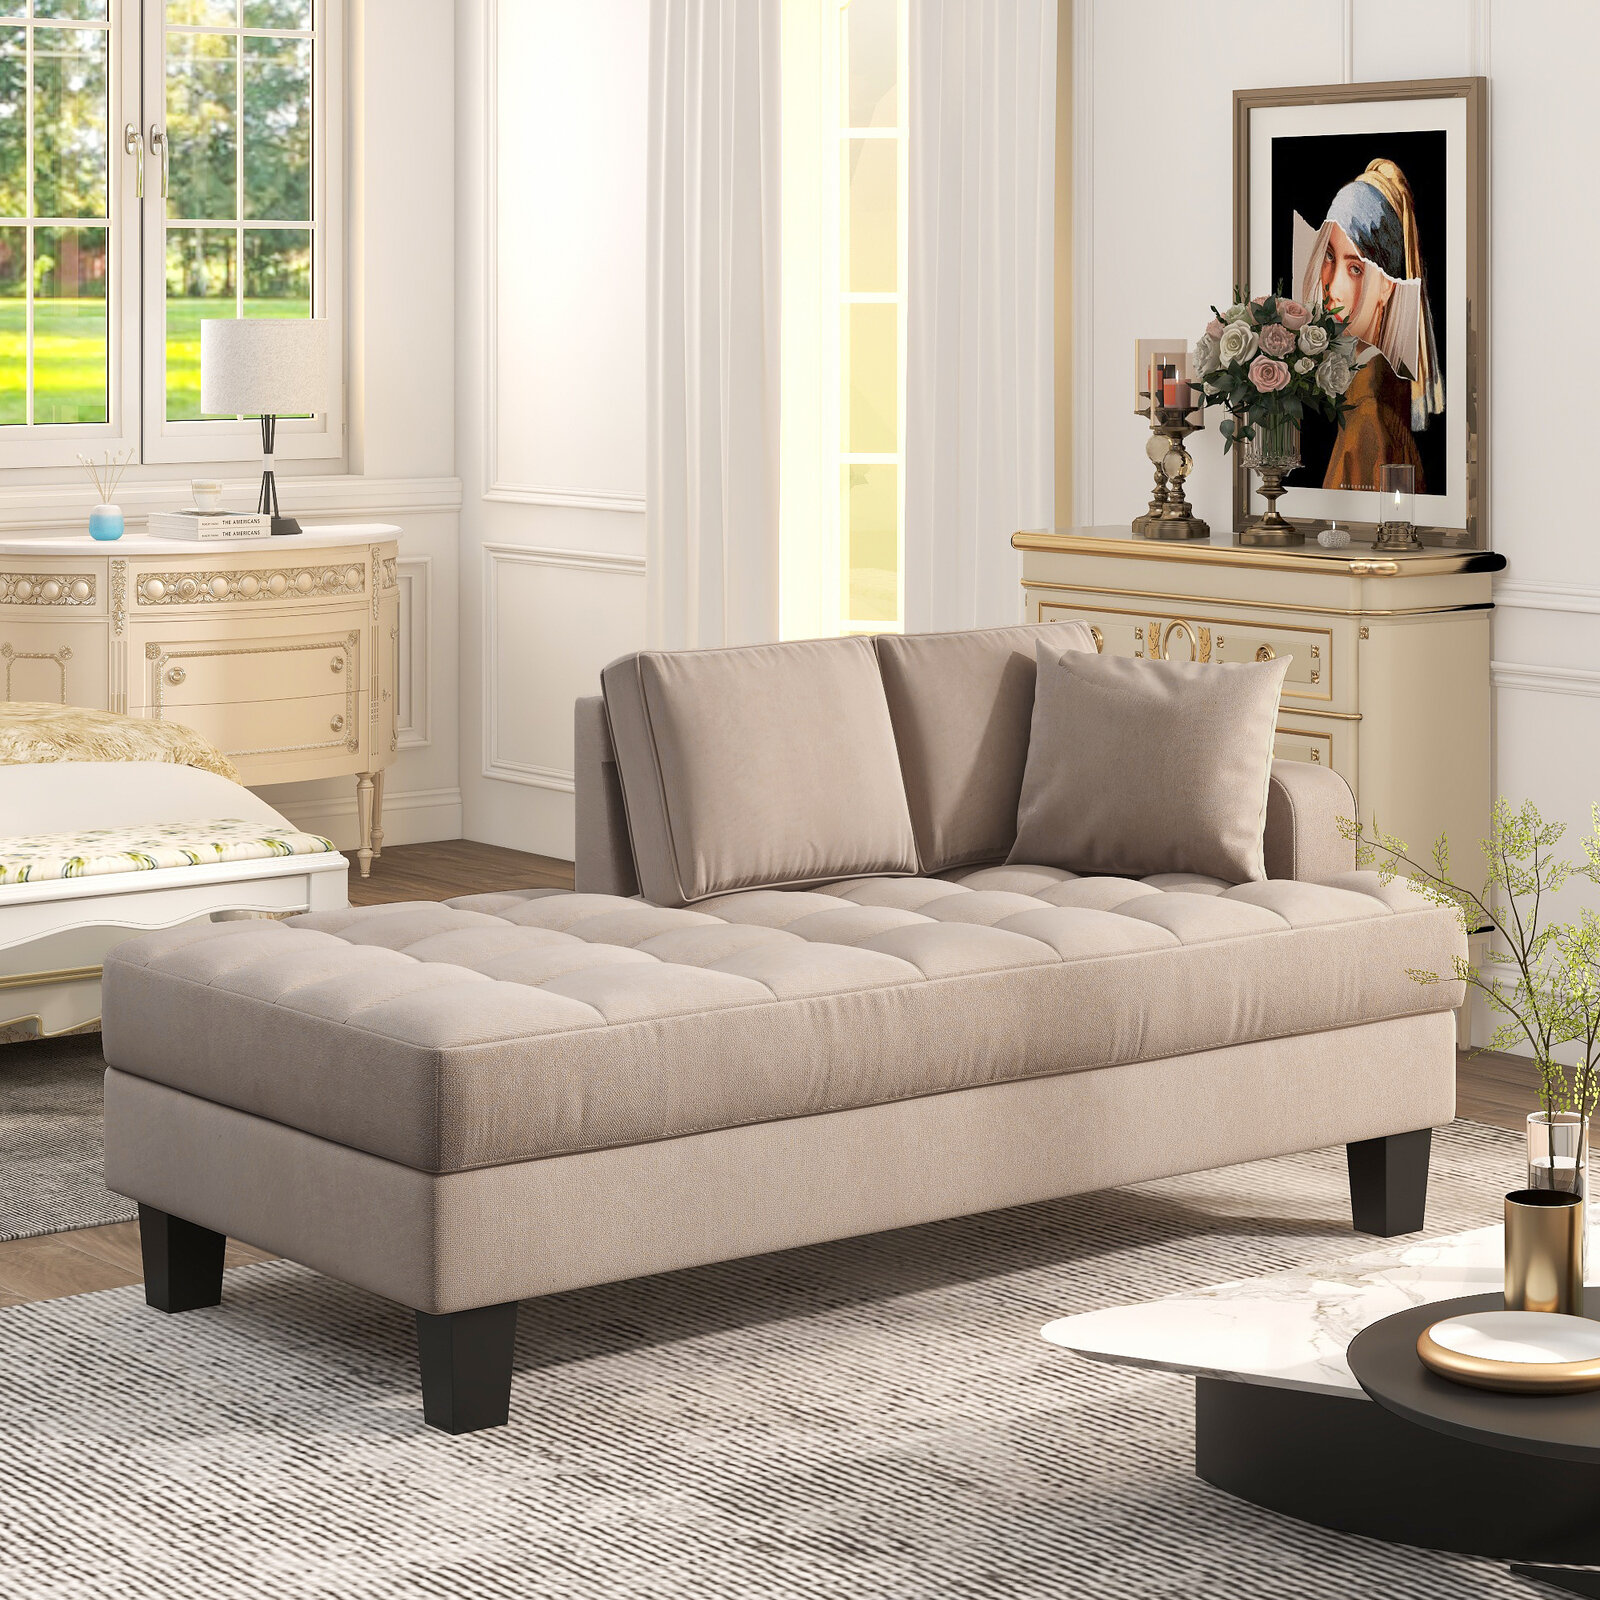 Details about   Gray Mid Century Armless Loveseat/Chair Modern Furniture Wood Accent Nook Seats 